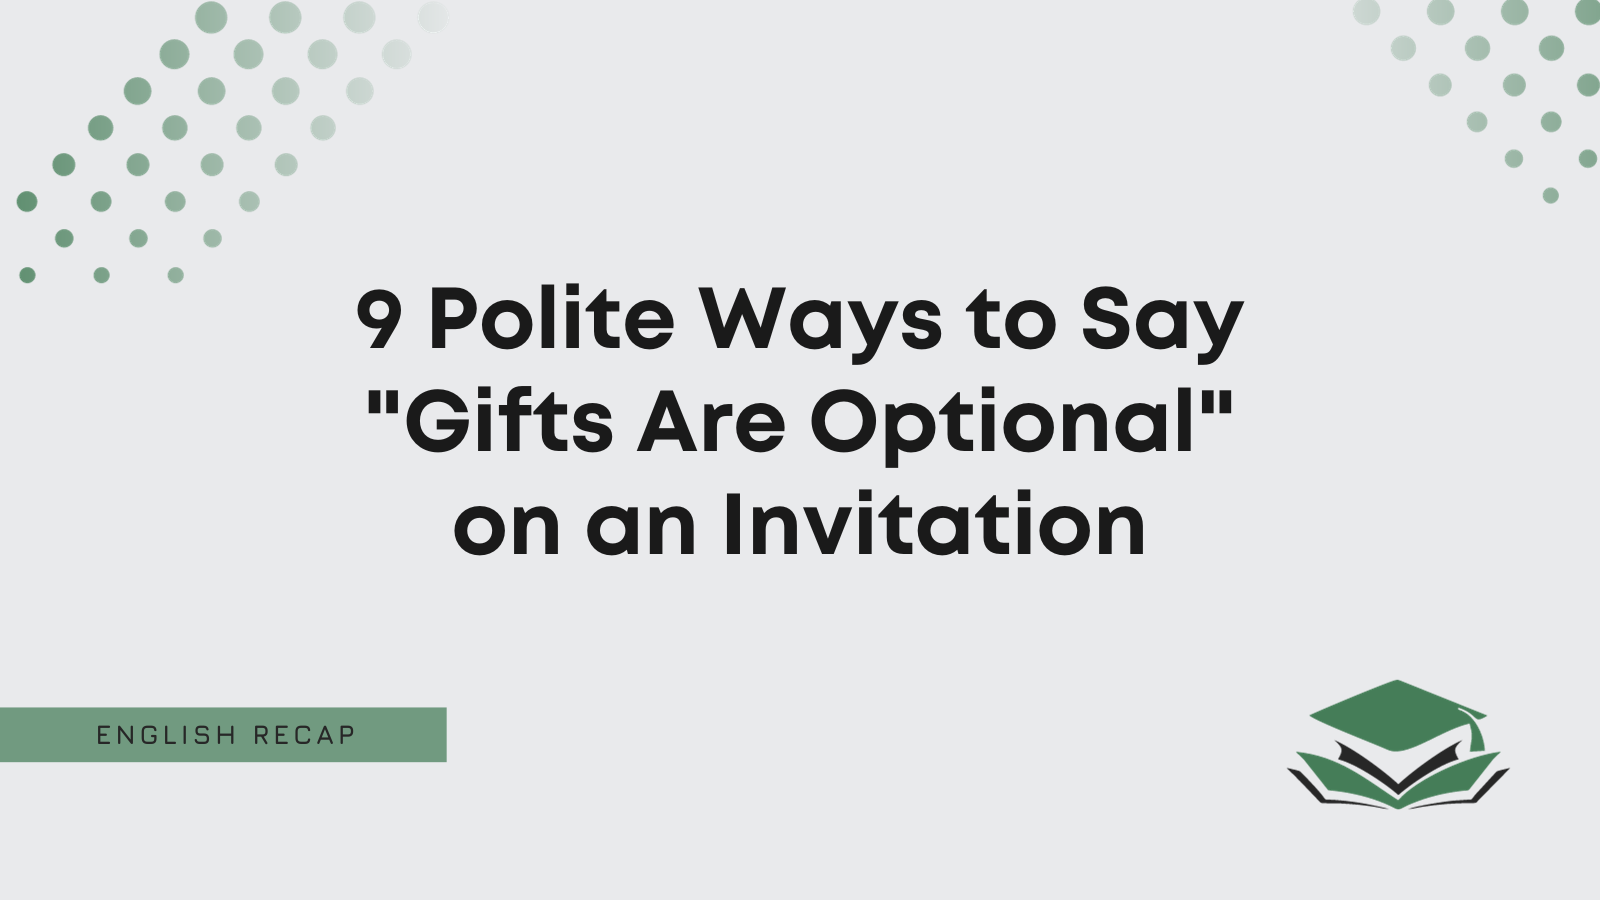 9 Polite Ways to Say "Gifts Are Optional" on an Invitation English Recap